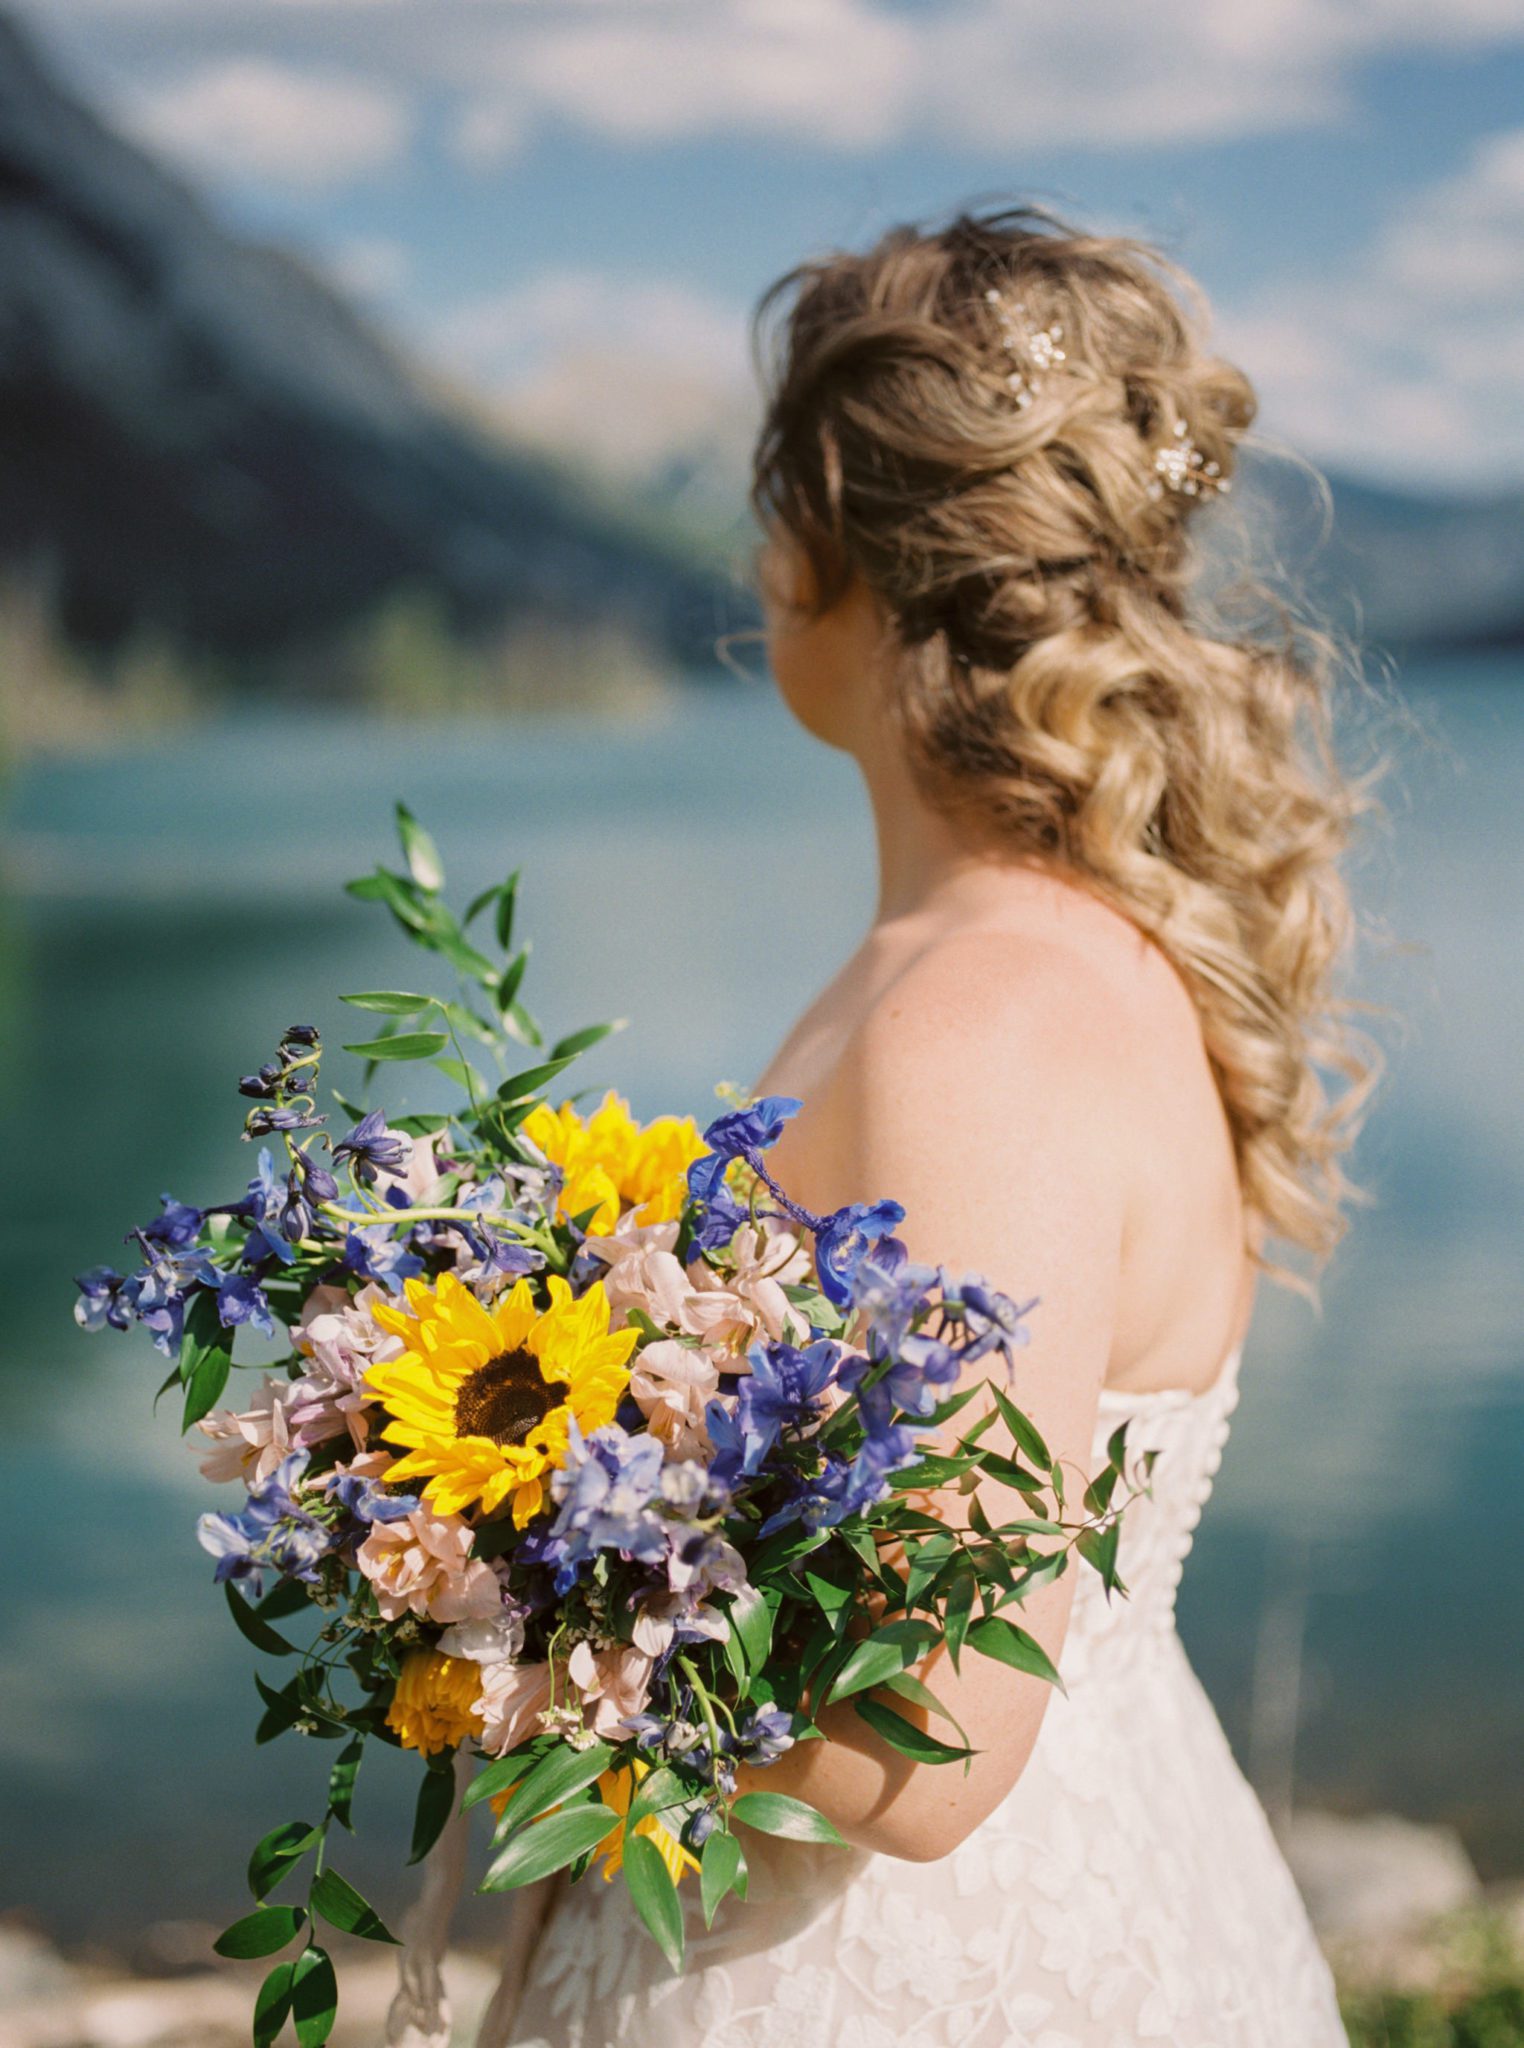 Sunflowers and wildflowers bridal bouquet for a mountain wedding